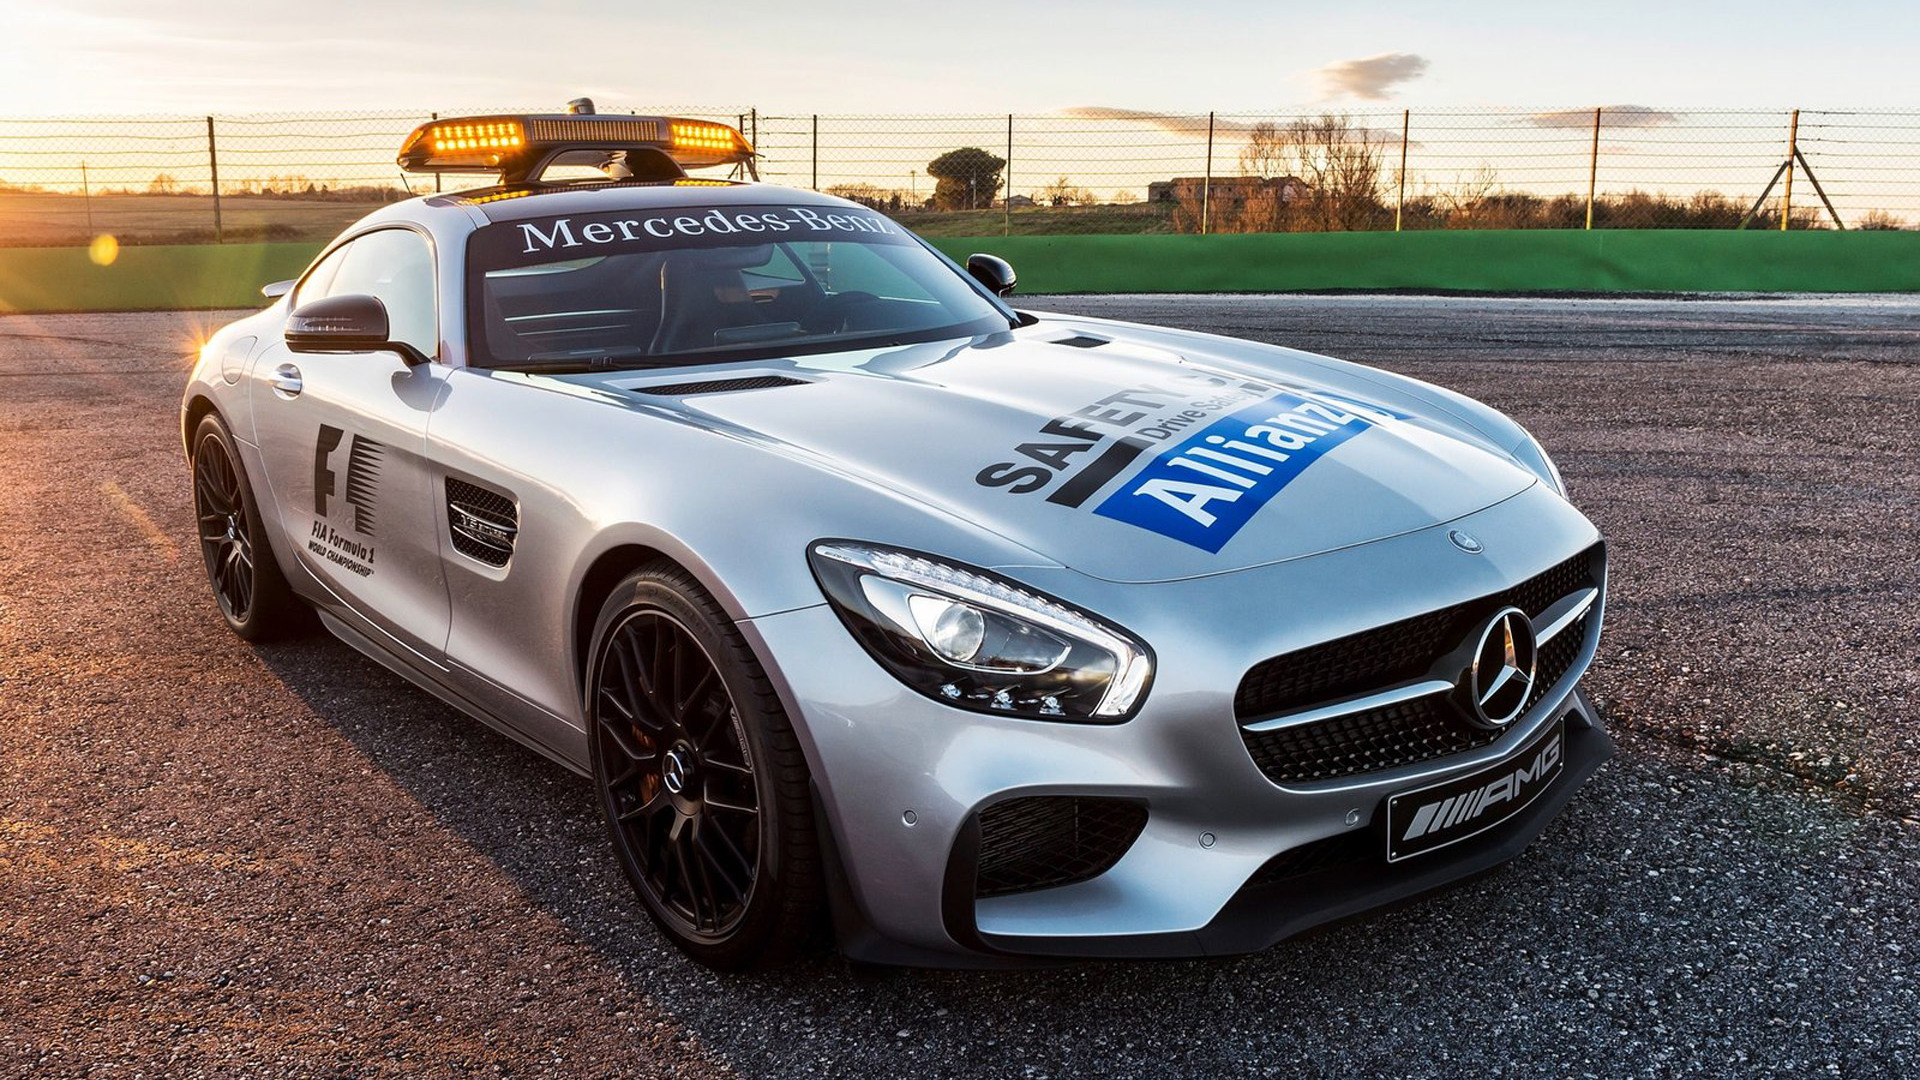 Mercedes-AMG GT S official safety car for the 2015 Formula One World Championship